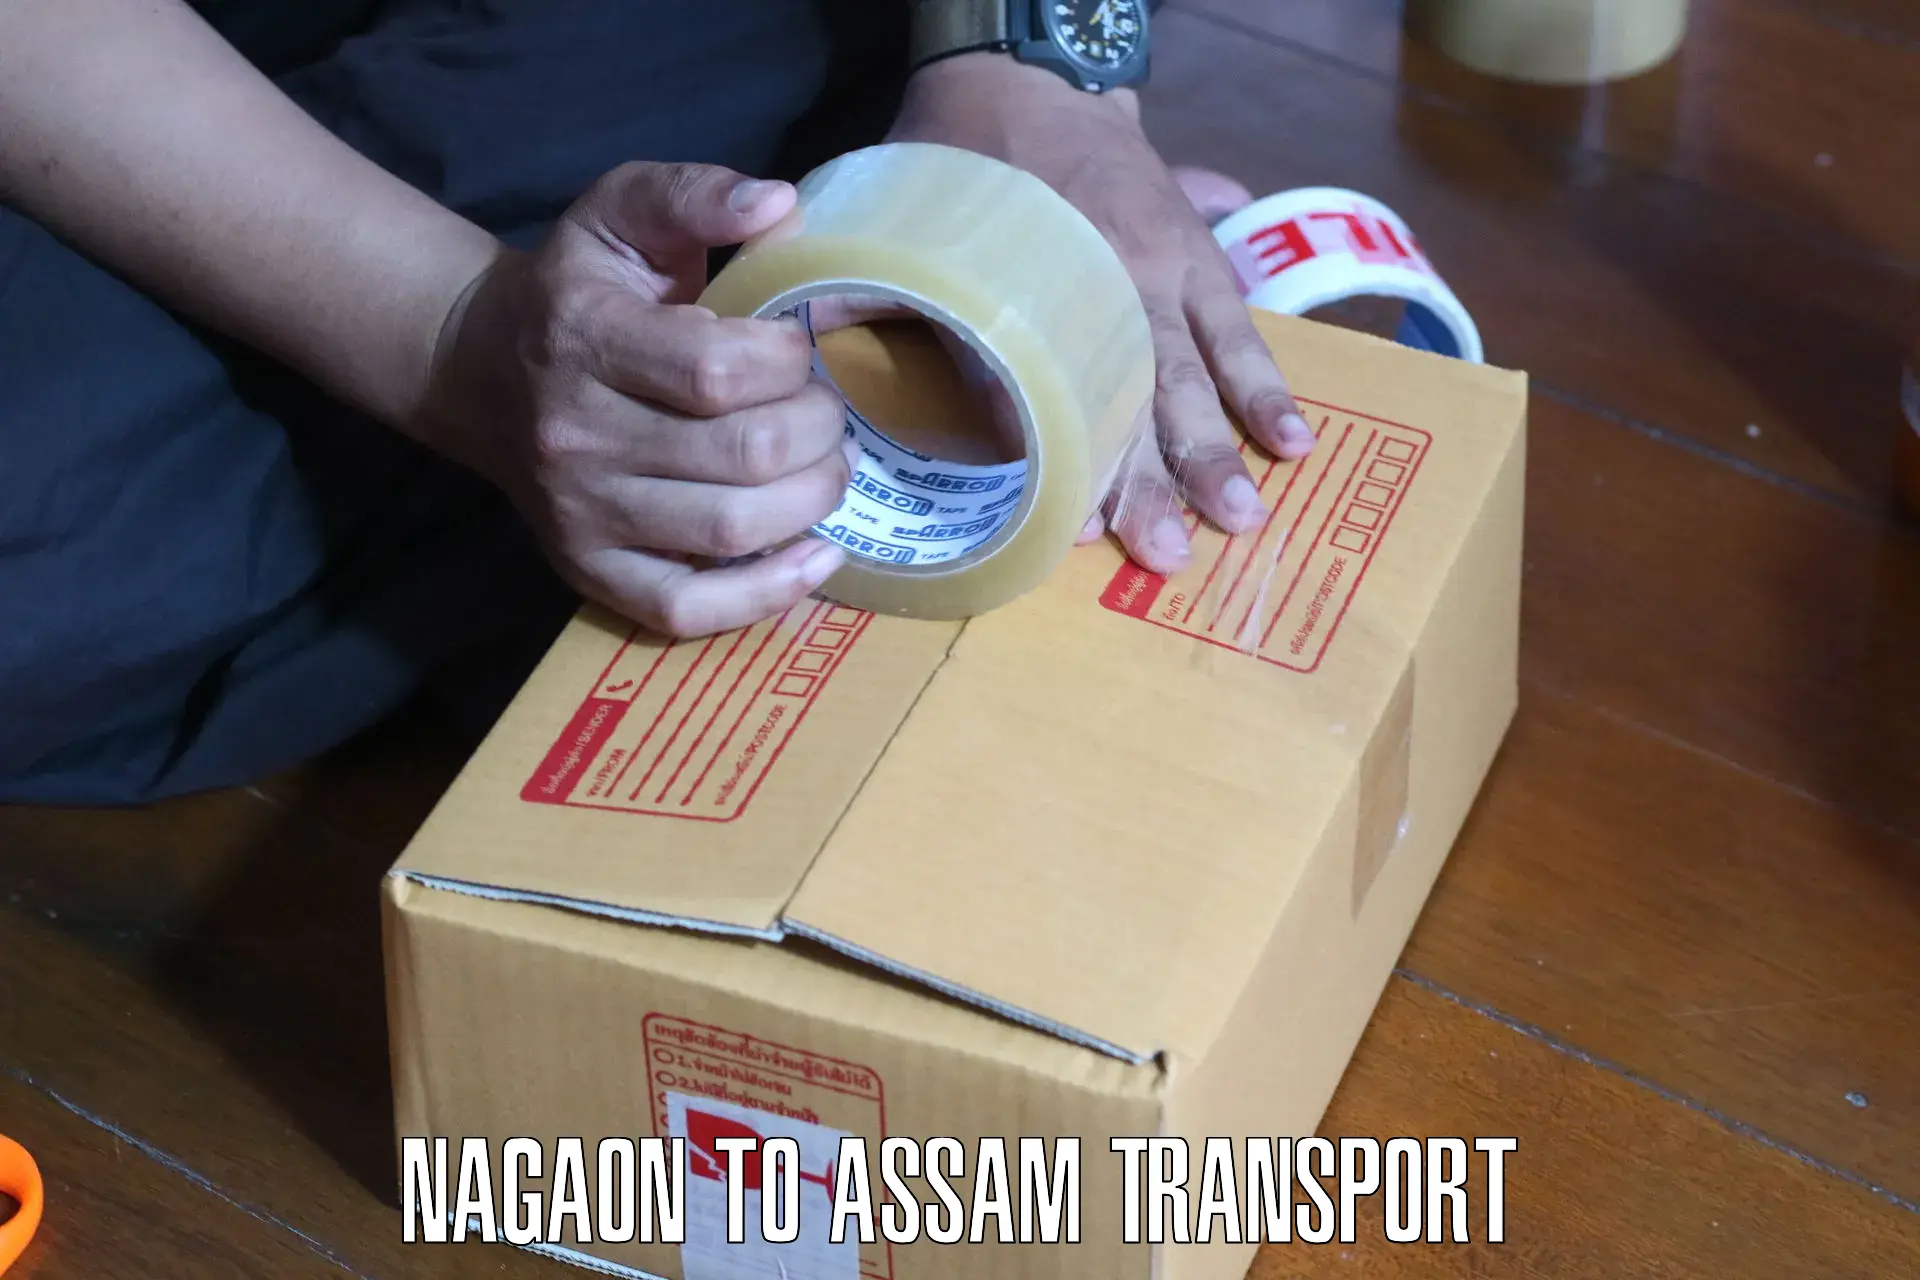 Domestic transport services Nagaon to Silchar